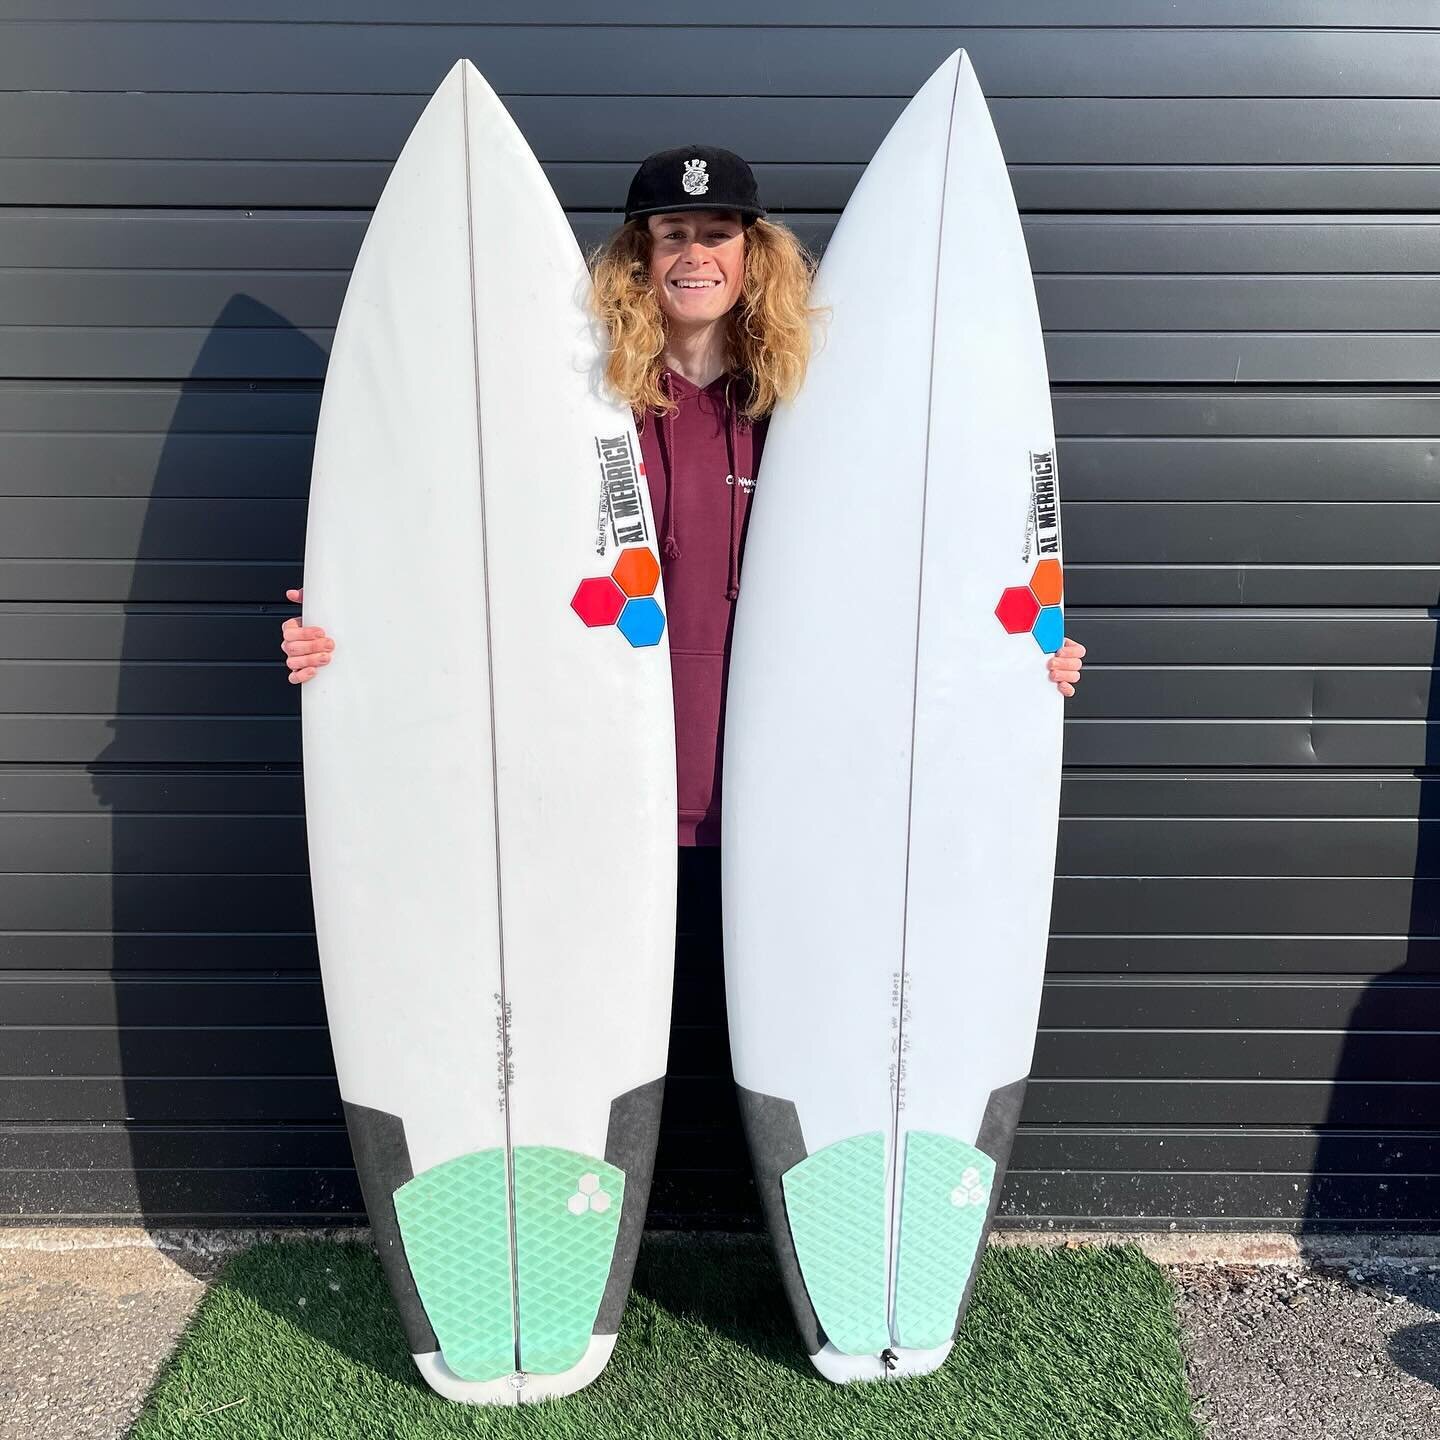 Here&rsquo;s two used @cisurfboards boards 

Left: Neckbeard 2
Lightly used 
6&rsquo; x 20 1/4 x 2 11/16 @ 36 Liters
-$599-

Right: Sampler
Used once. Like new condition
6&rsquo;2 x 20 5/8 x 2 3/4 @ 37.5 Liters
-$699-